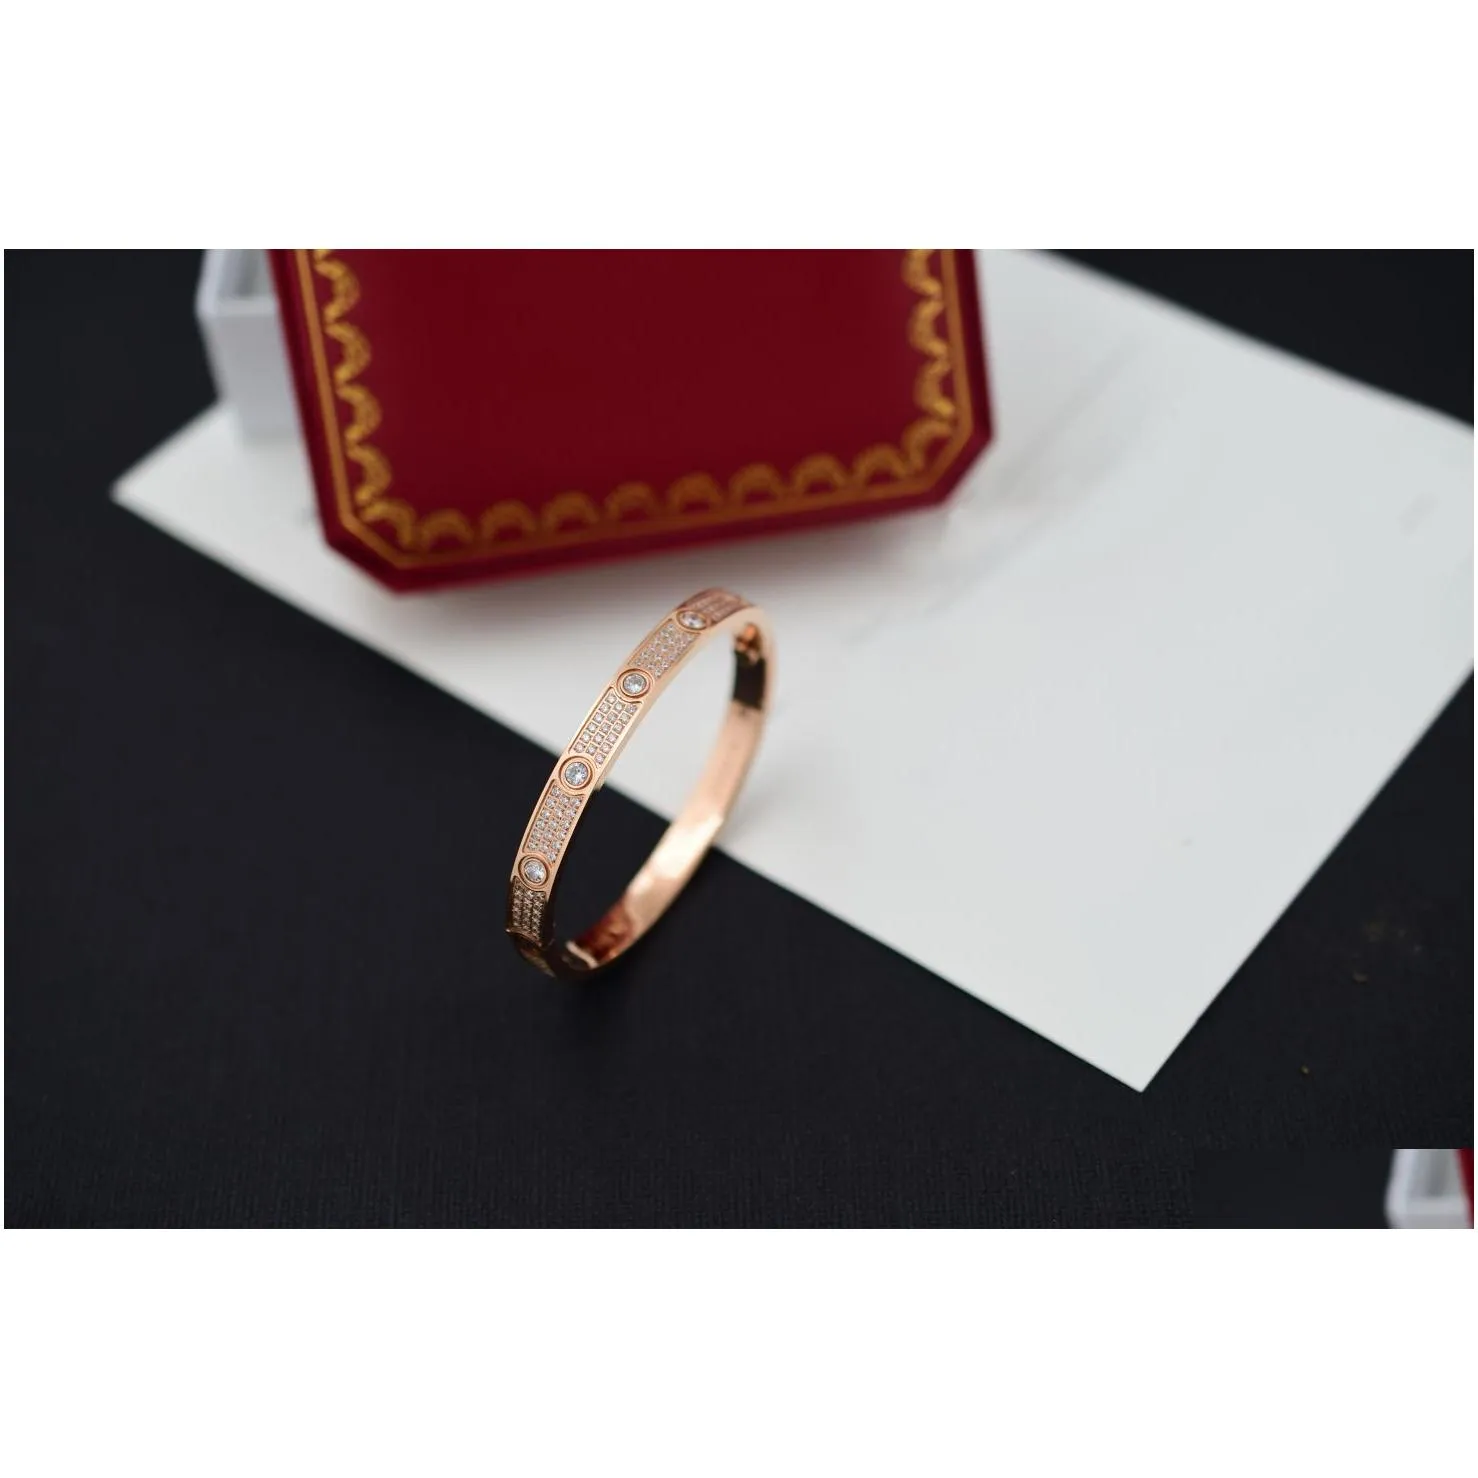 Bangle Designer Jewelry Gold Bracelet Luxe Fashion Stainless Steel Sier Rose Cuff Lock 4Cz Diamond For Woman Man Party Bangles With B Ottgl